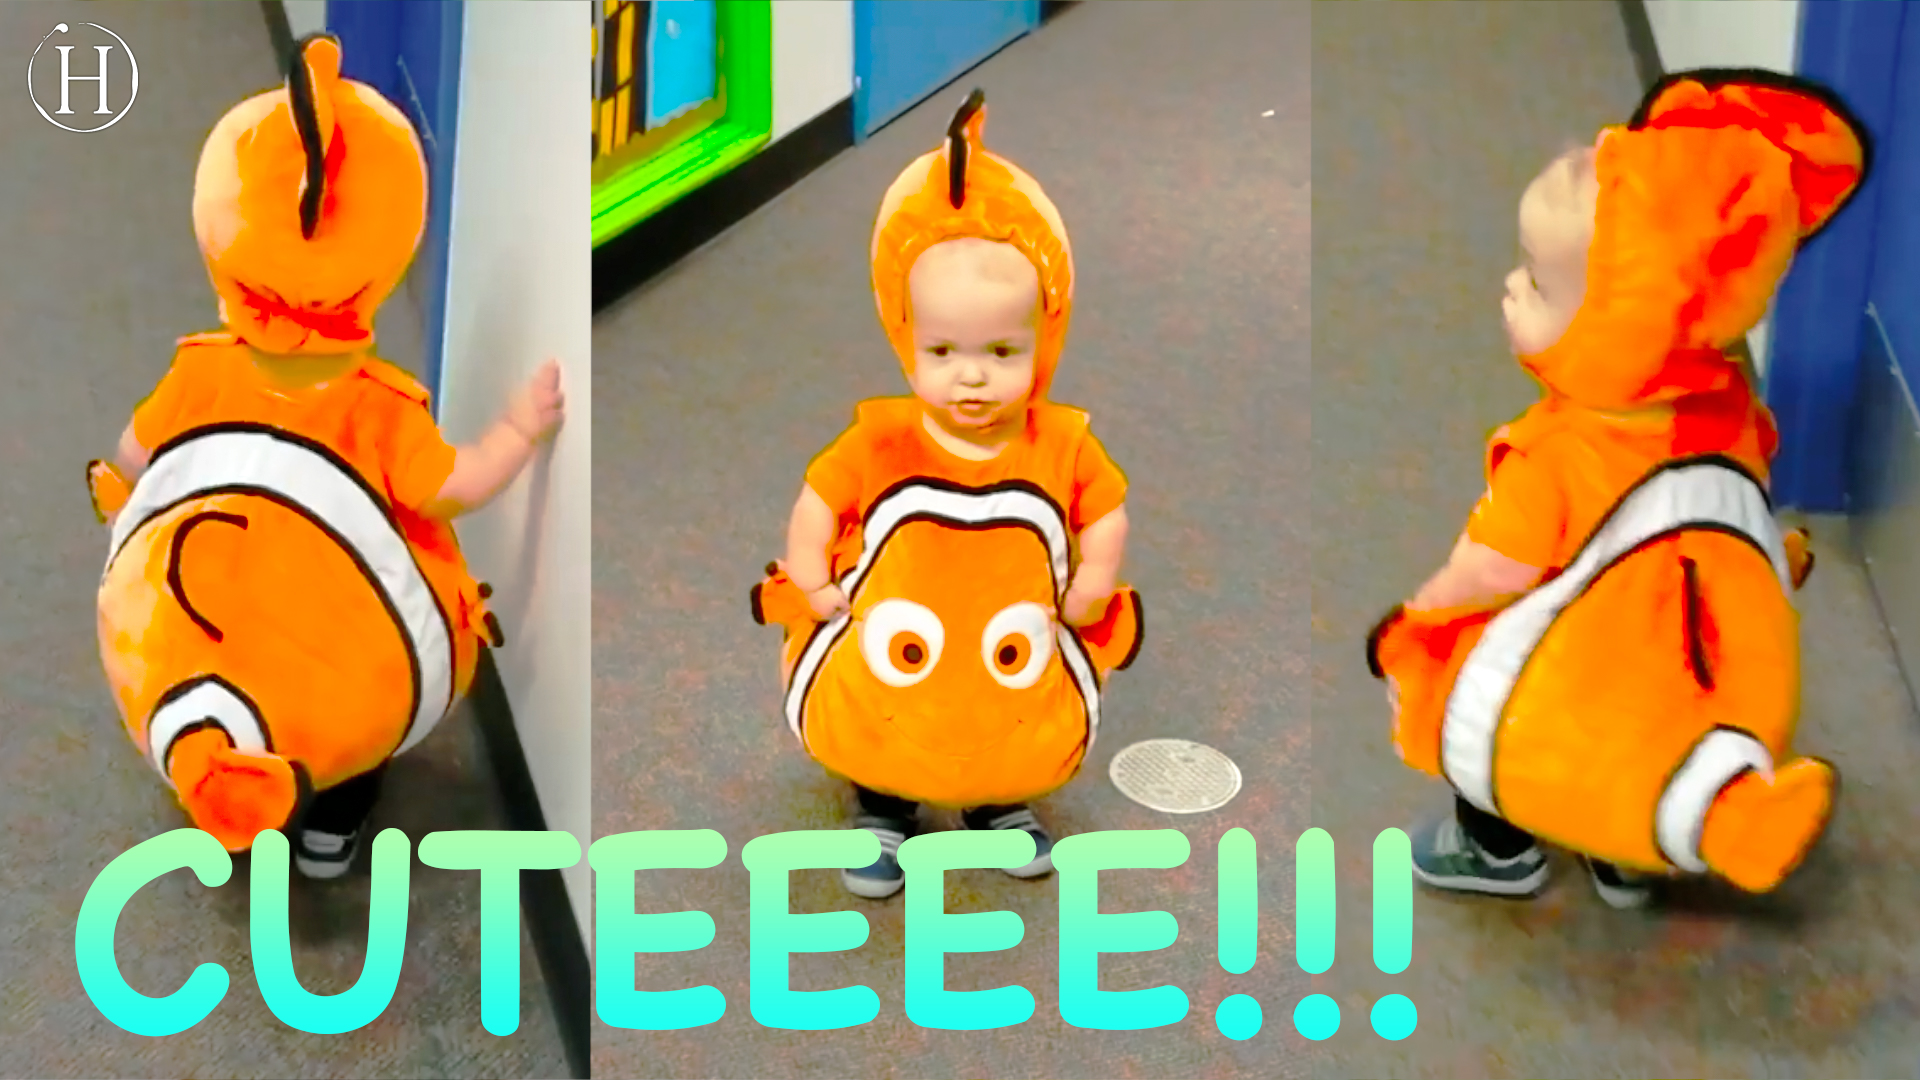 Adorable Baby Dressed As Clown Fish | Humanity Life